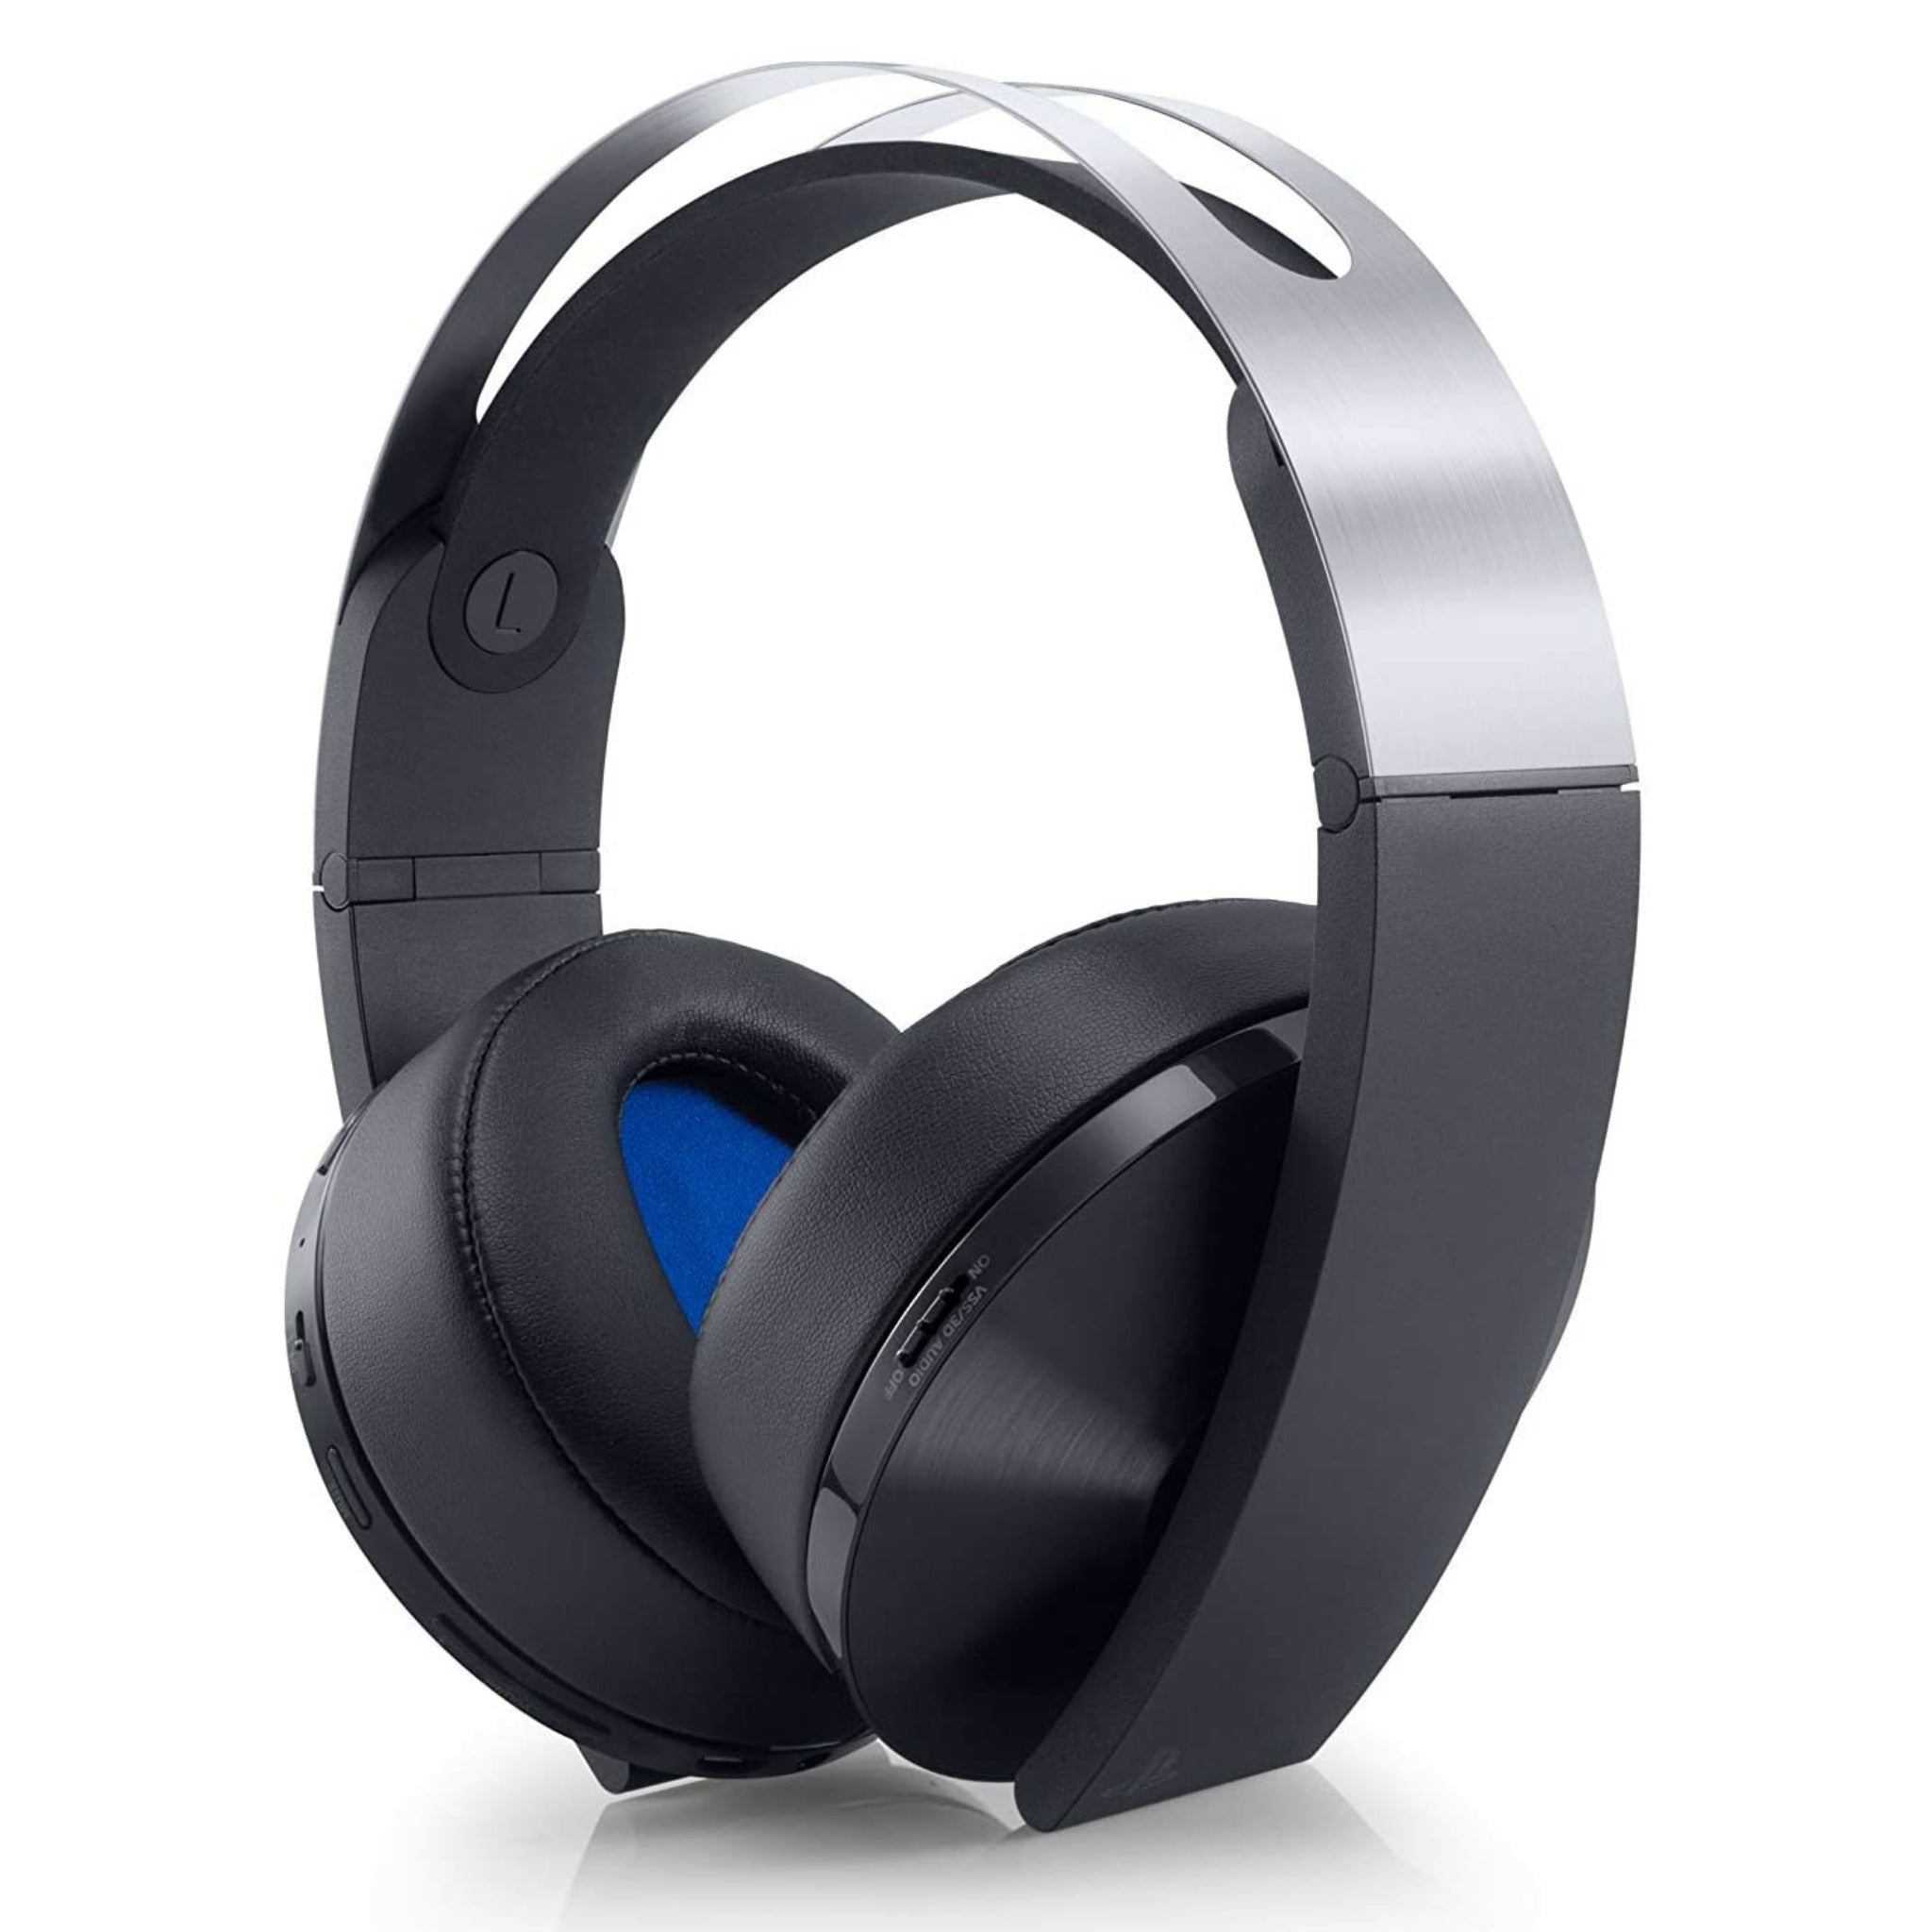 Sony PS4 Platinum Wireless Headset 7.1 - Accessoires PS4